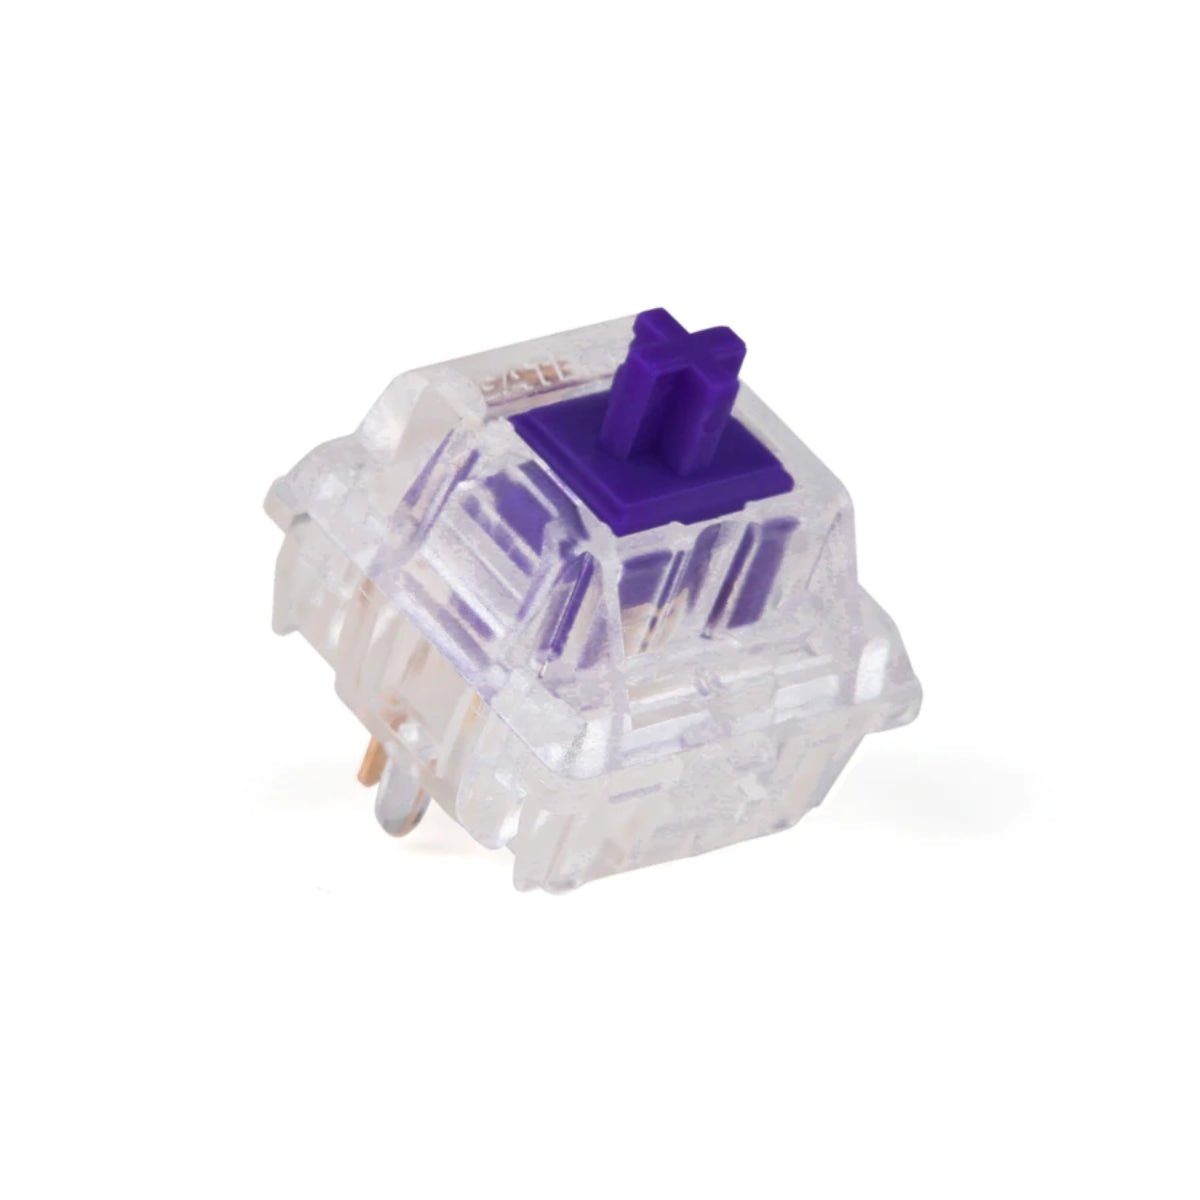 KBD Fans Zeal V2 Tactile Switches 78g - Zealios - Store 974 | ستور ٩٧٤